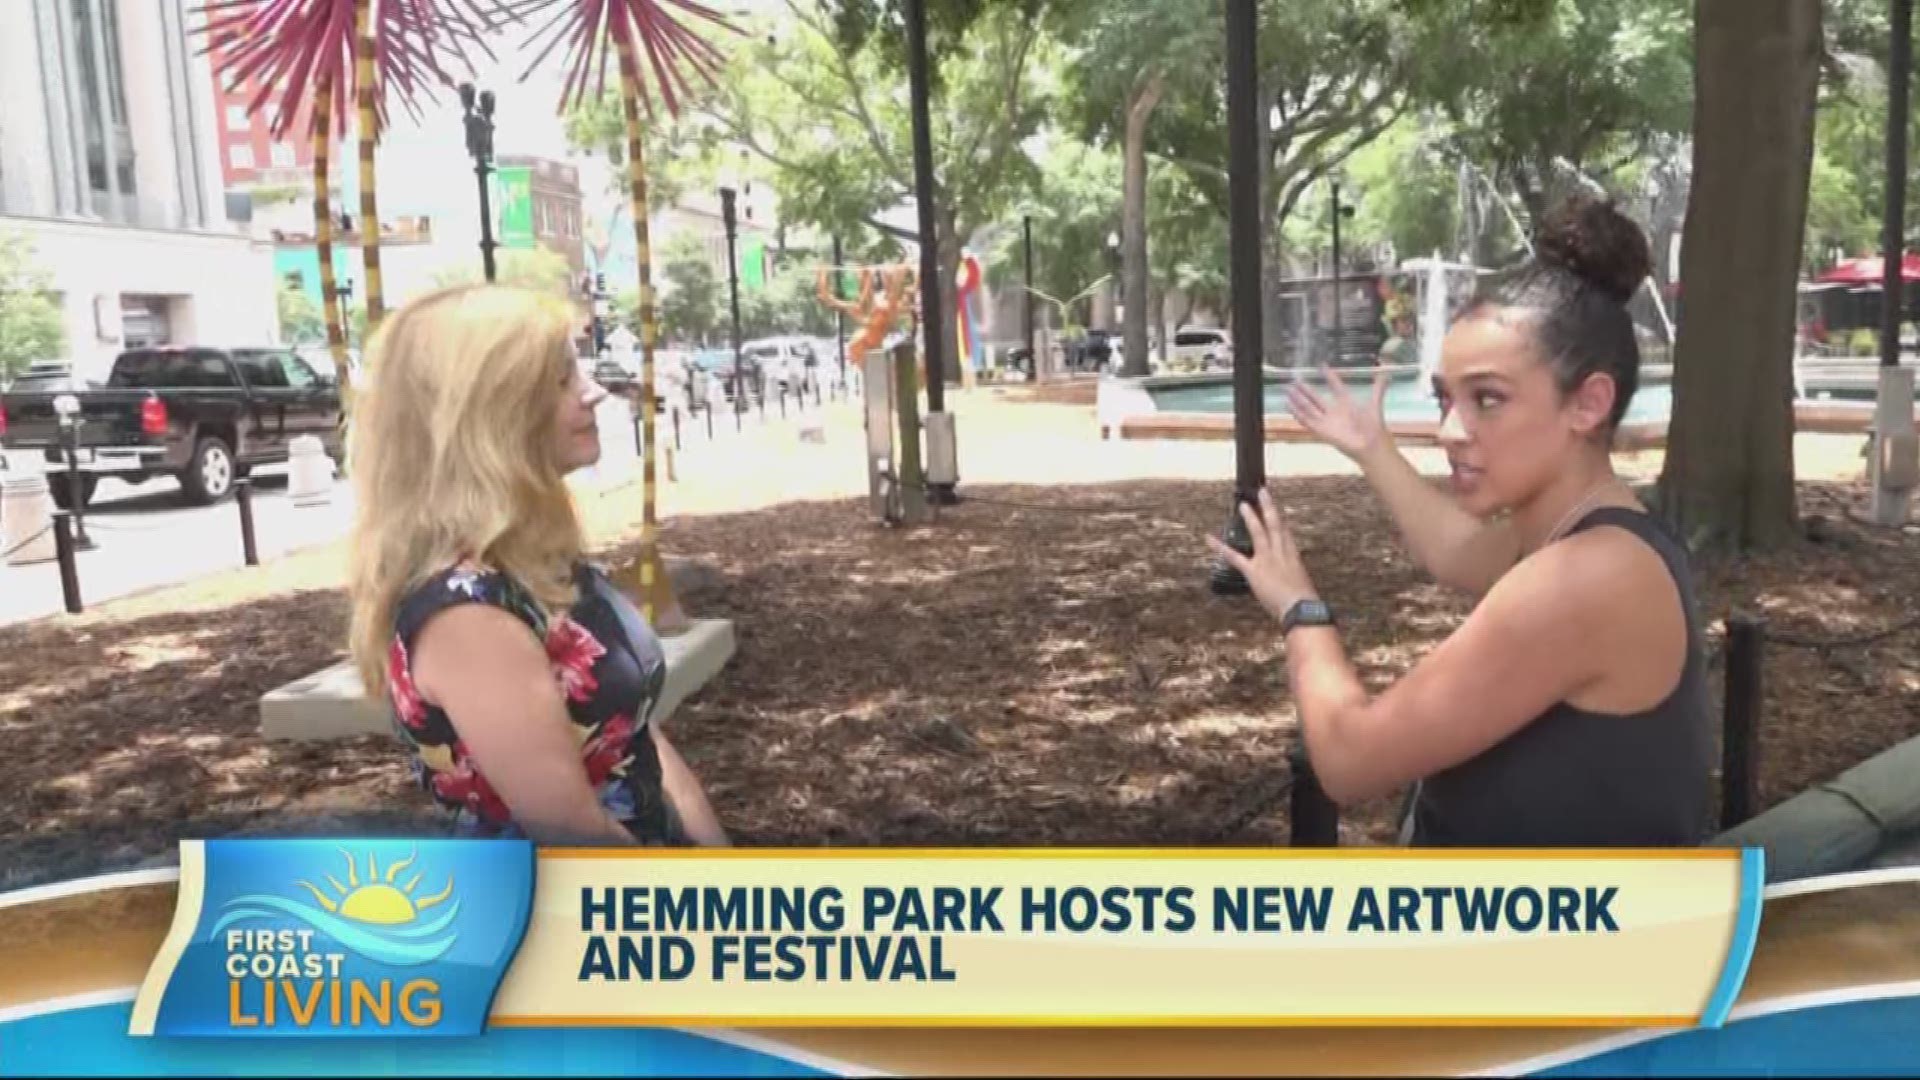 Check out the fun stuff happening at Hemming Park!